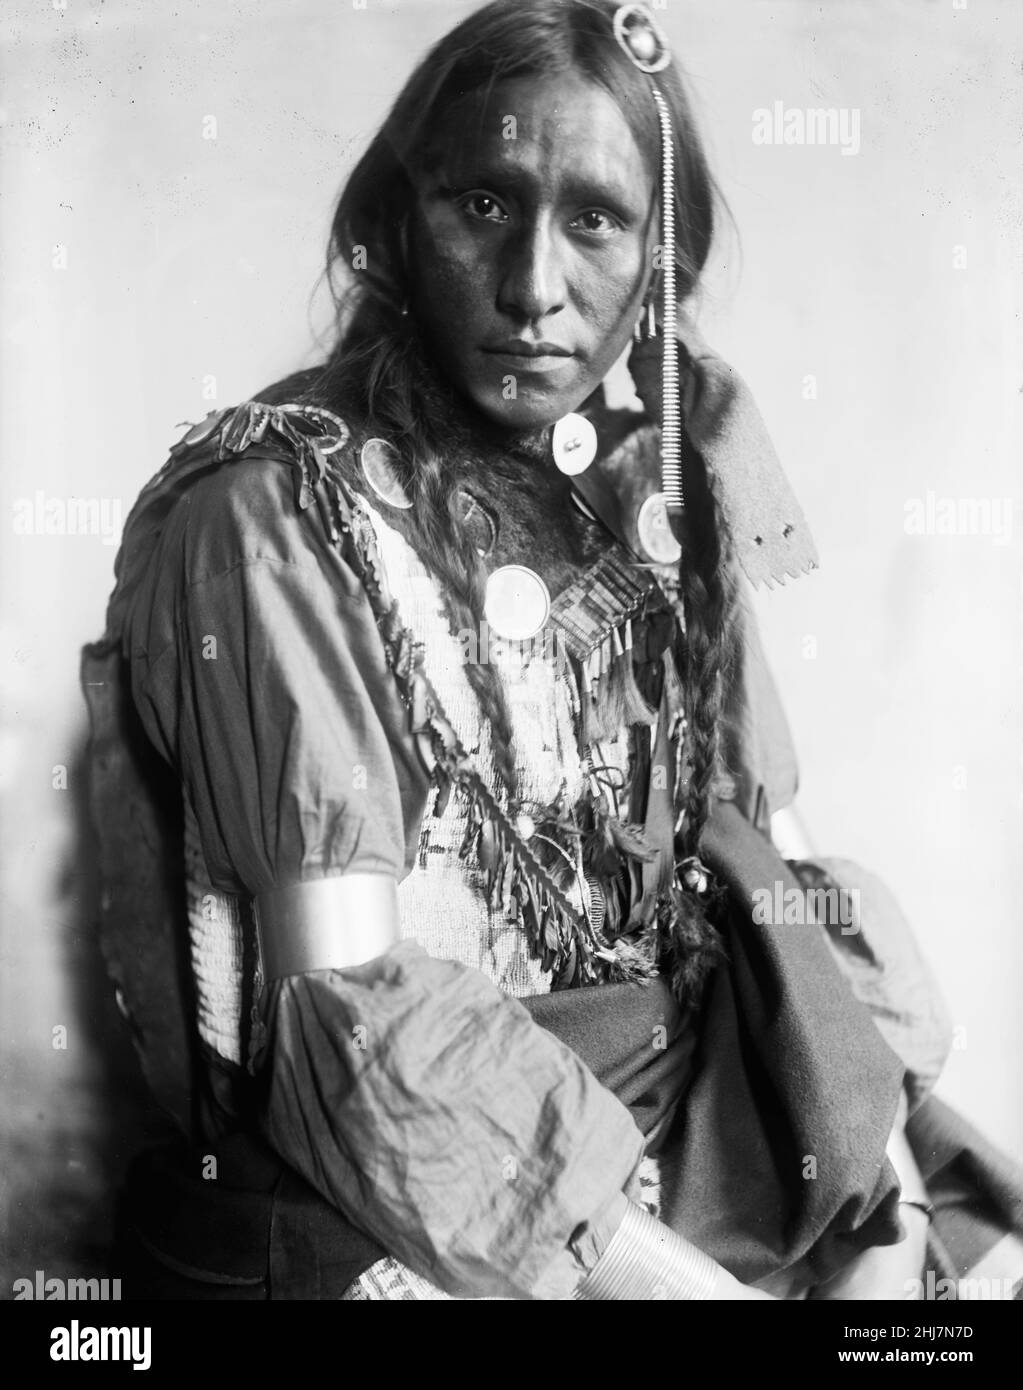 White War Bonnet - Antique and vintage photo - Native american / Indian / American Indian, Käsebier, Gertrude, 1852-1934, photographer. 1900. Stock Photo